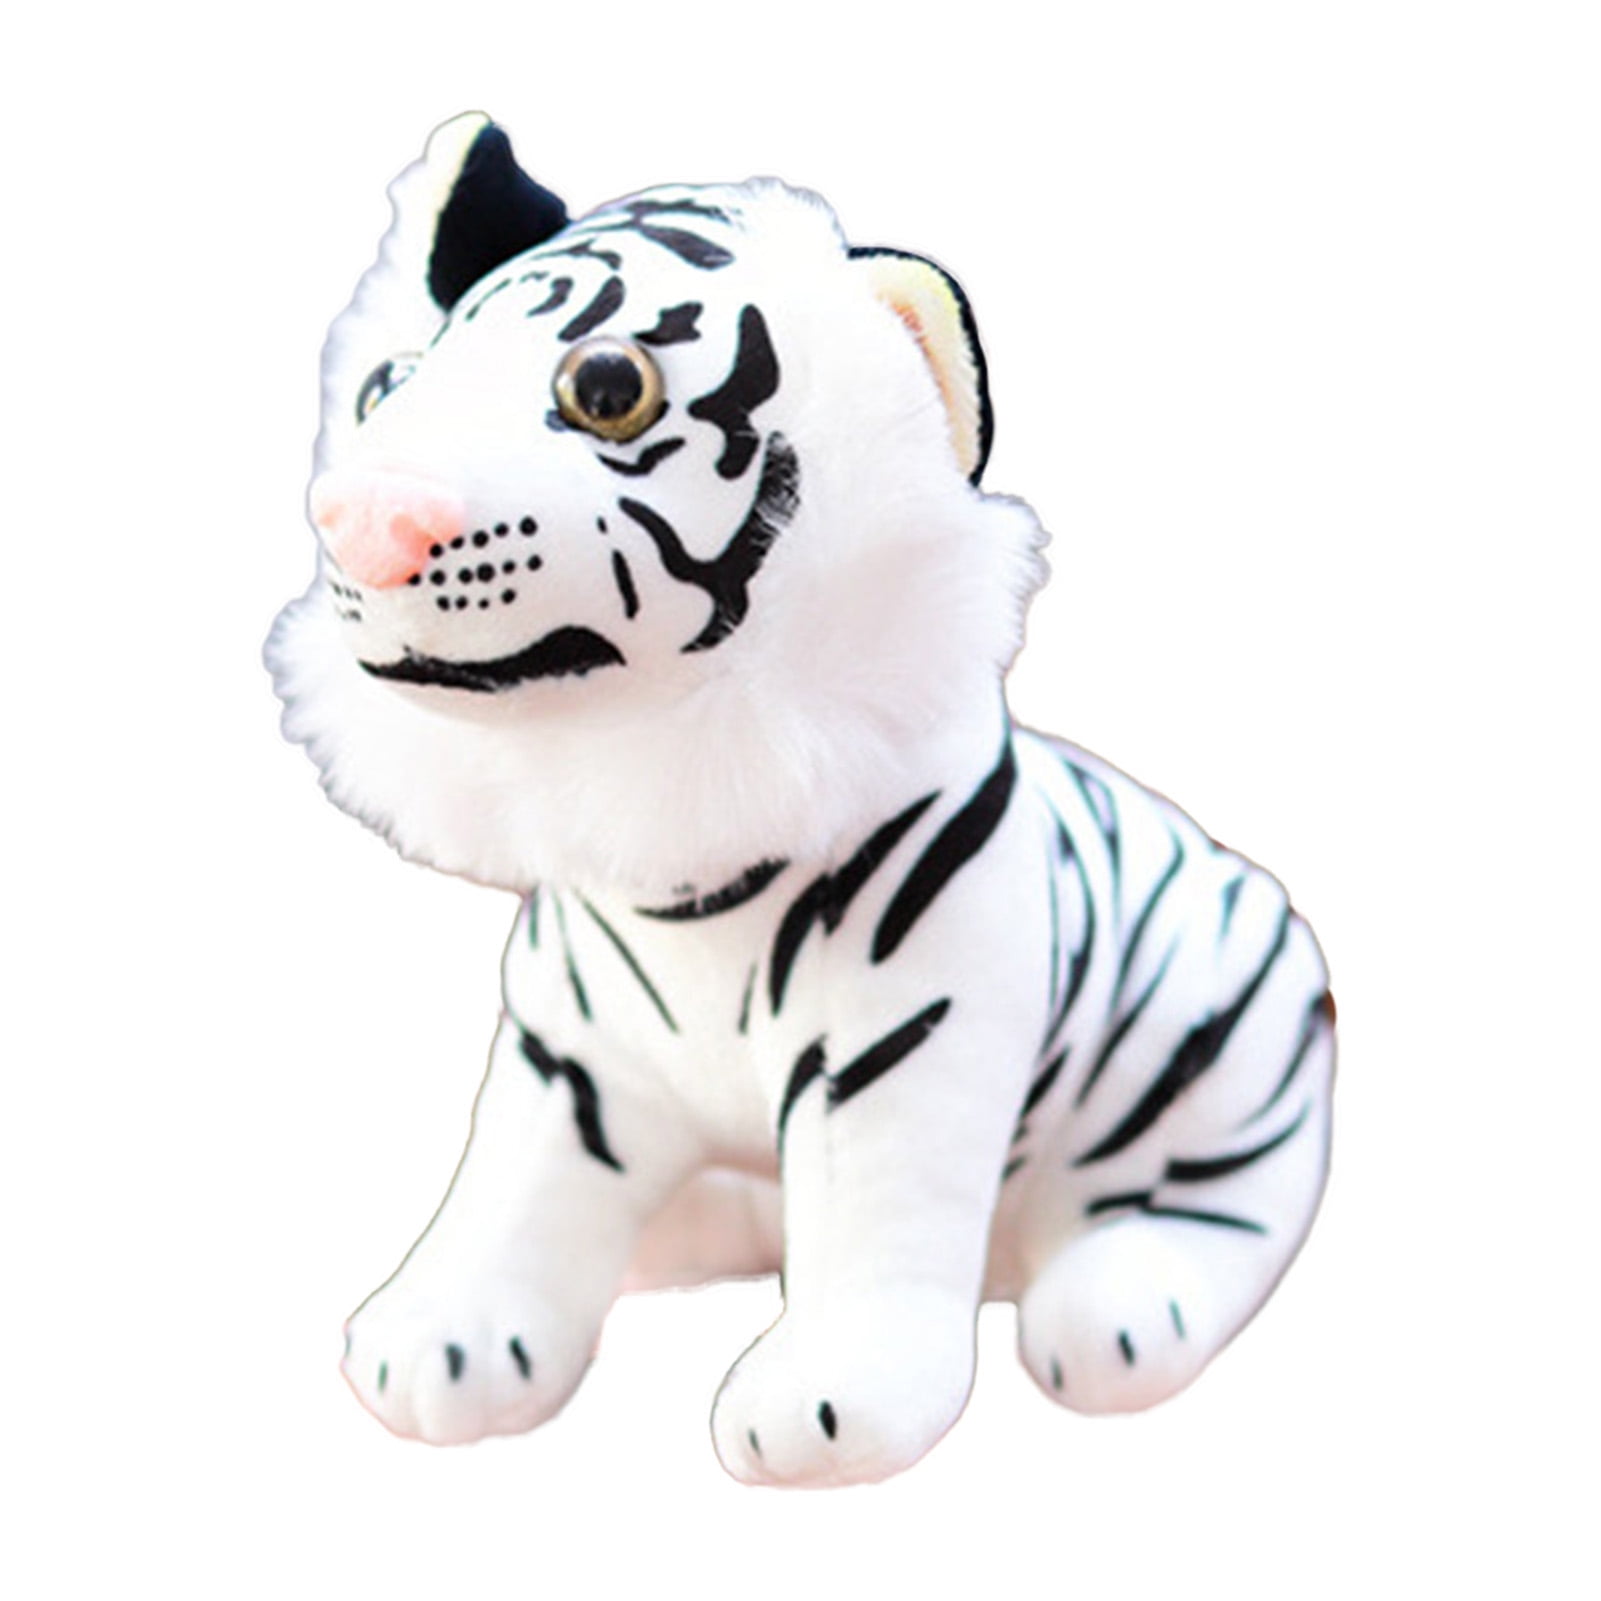 24in Tiger Plush Animal Realistic Big White Tiger Hairy Soft Stuffed Toy Pillow 